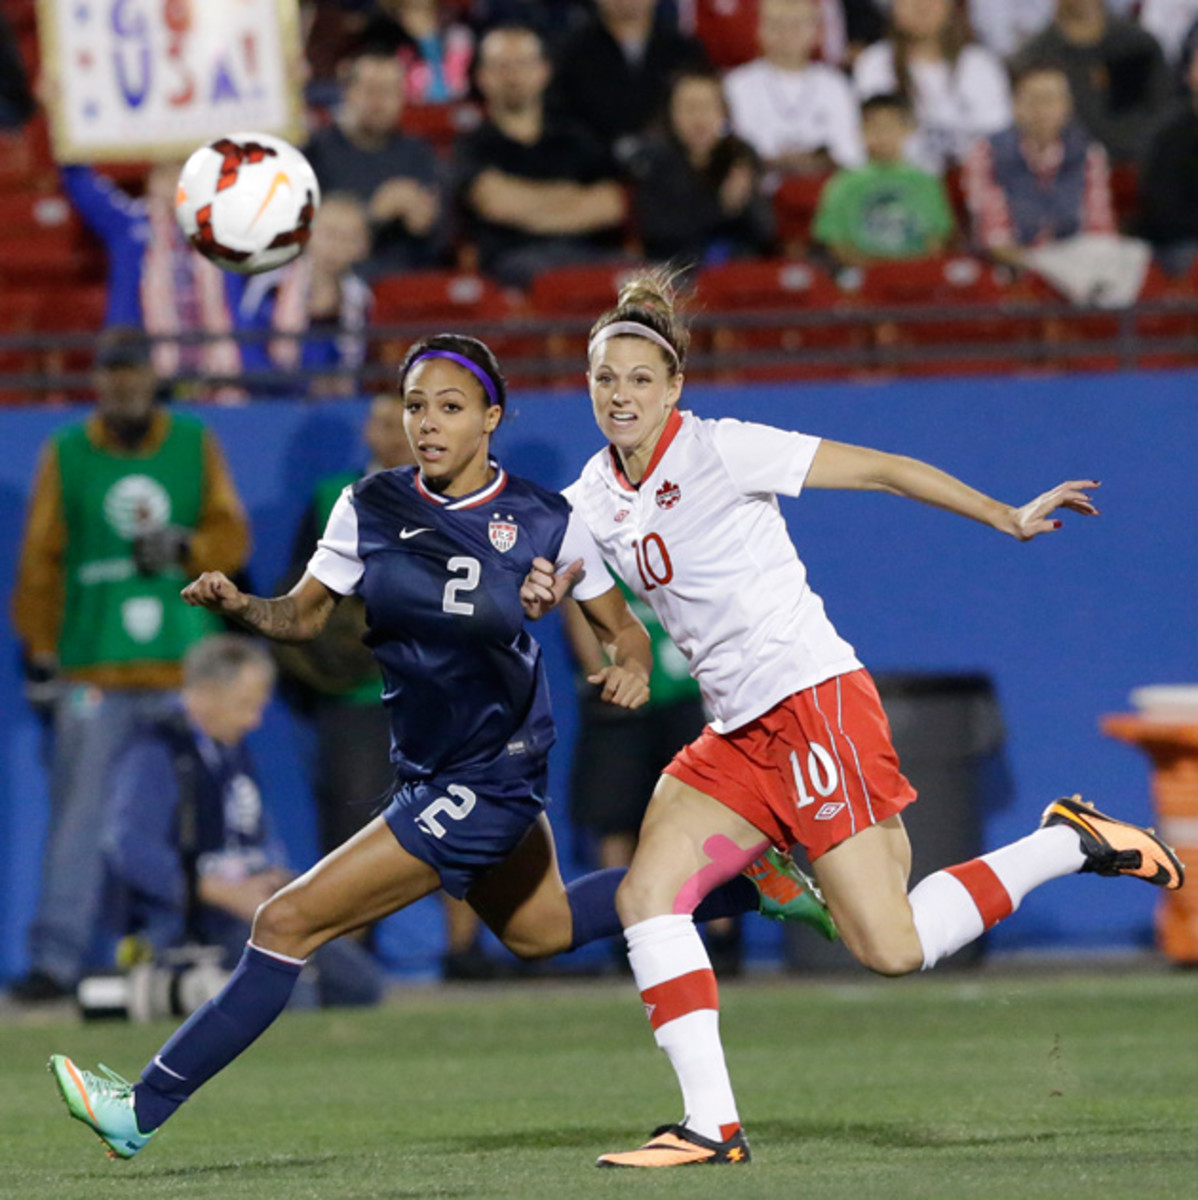 U.S forward Sydney Leroux (2) and Canada defender Lauren Sesselmann (10) chase the ball during the first half of a soccer game Friday, Jan. 31, 2014, in Frisco, Texas. The United States won 1-0.